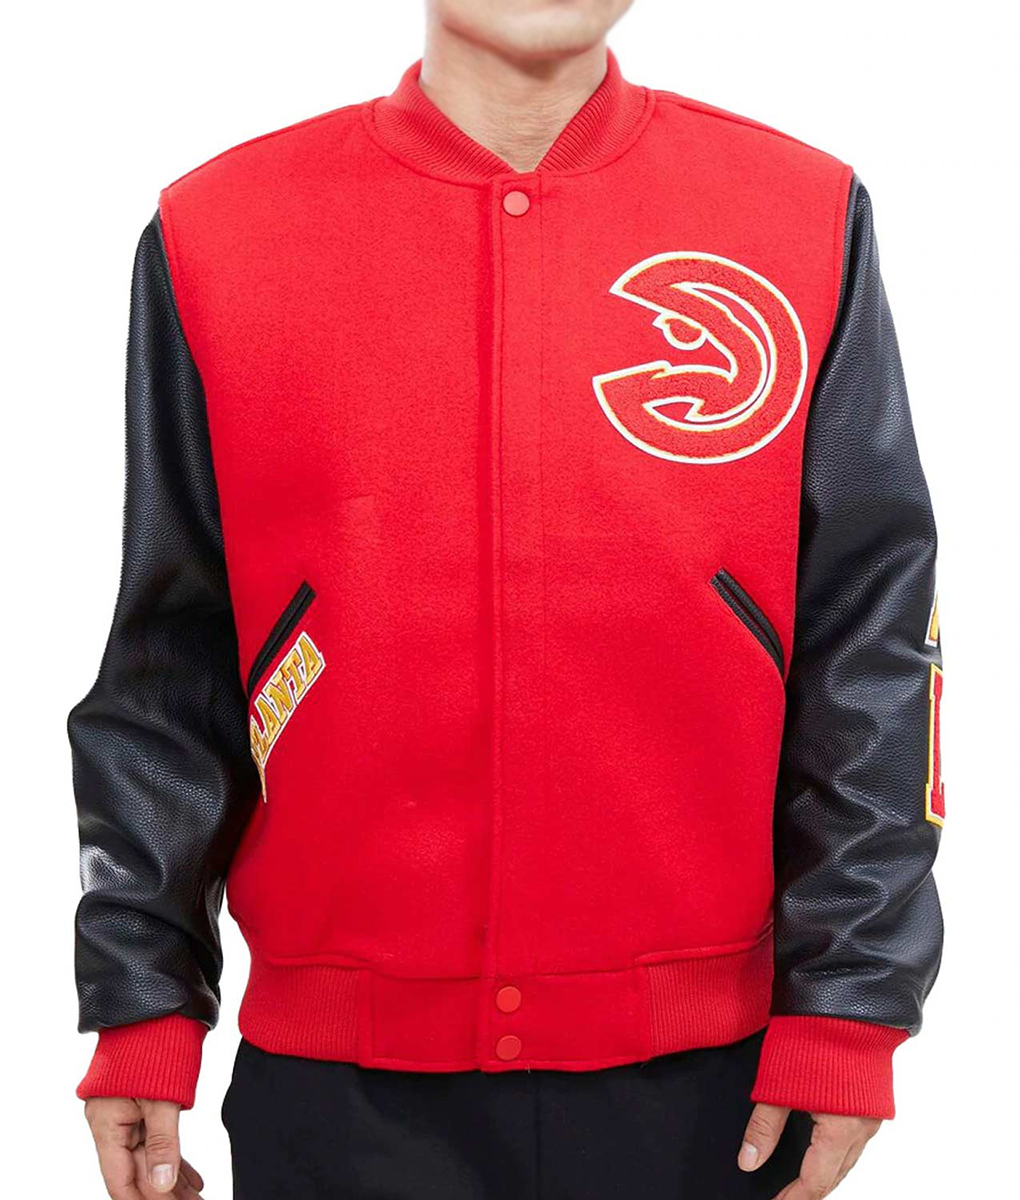 ATL Hawks Red and Black Jacket (4)